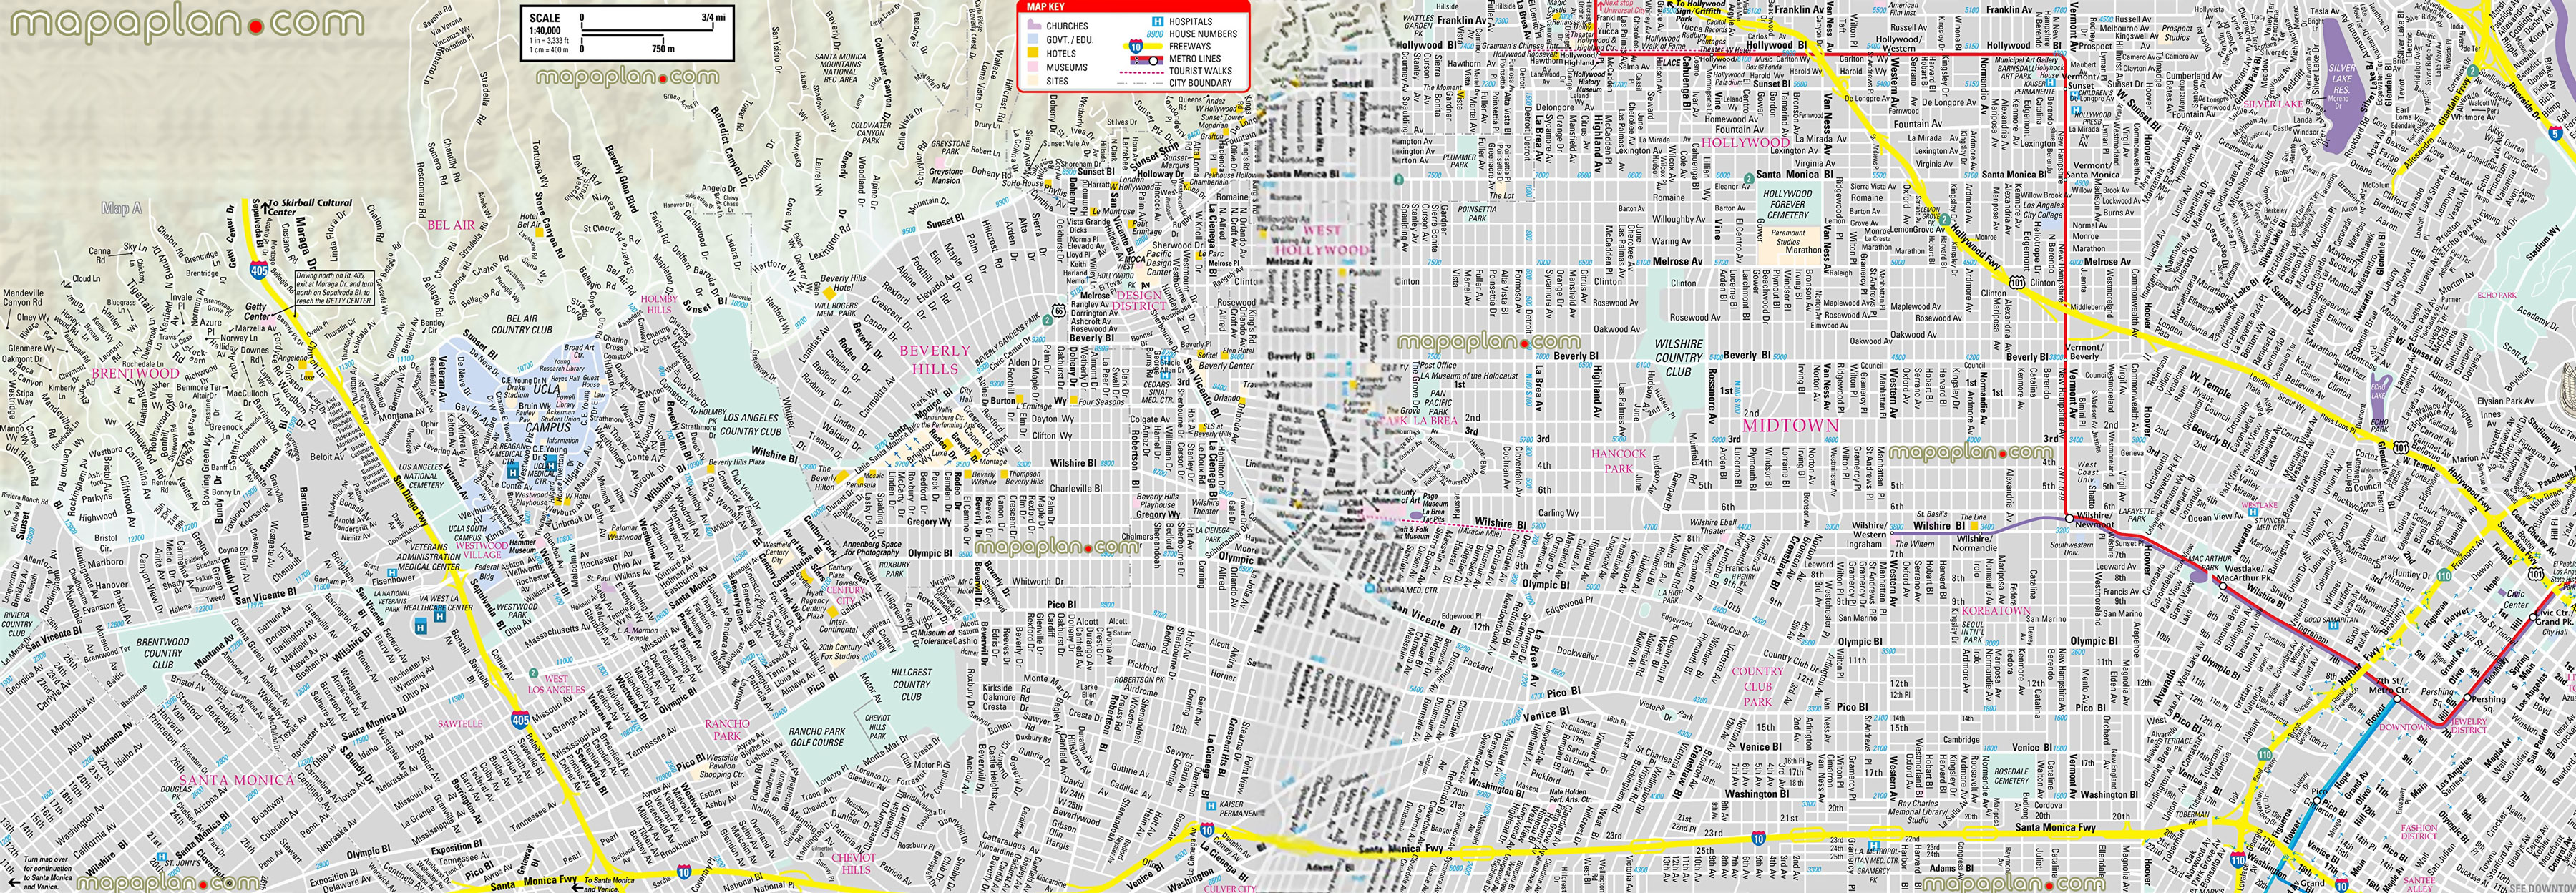 Los Angeles Map Detailed Road Street Names Plan With Favourite